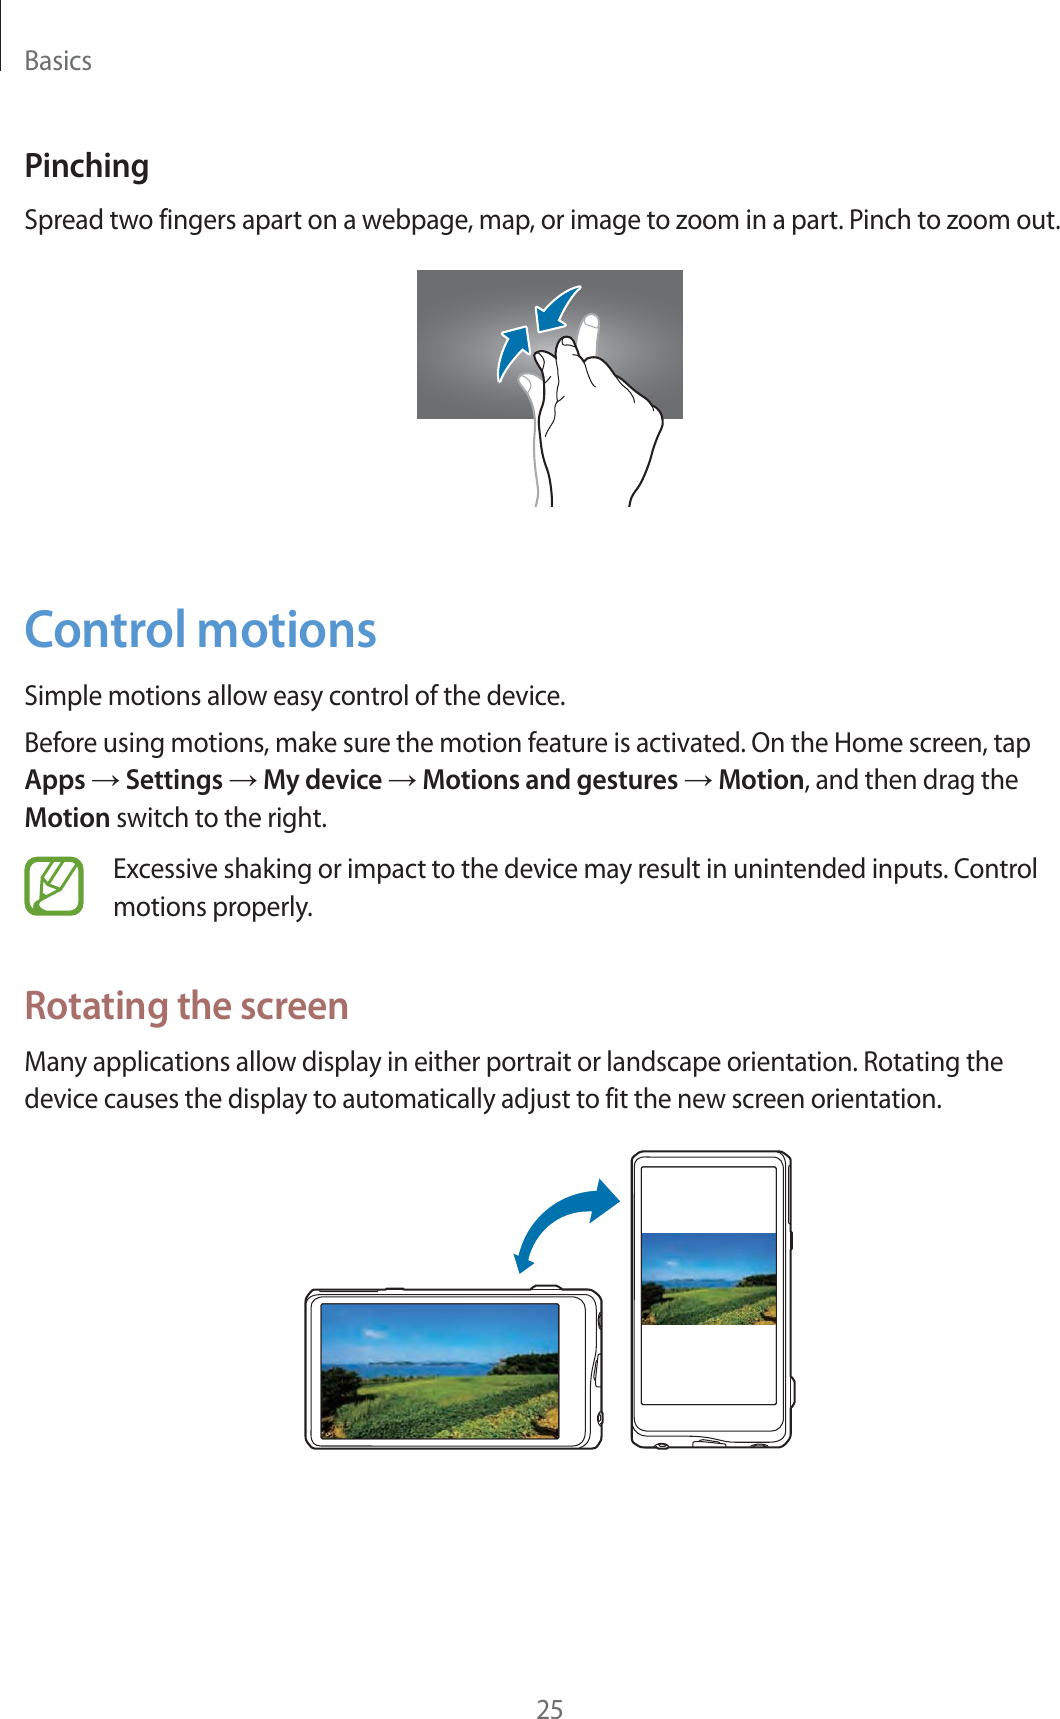 Basics25PinchingSpread two fingers apart on a webpage, map, or image to zoom in a part. Pinch to zoom out.Control motionsSimple motions allow easy control of the device.Before using motions, make sure the motion feature is activated. On the Home screen, tap Apps ĺ Settings ĺ My device ĺ Motions and gestures ĺ Motion, and then drag the Motion switch to the right.Excessive shaking or impact to the device may result in unintended inputs. Control motions properly.Rotating the screenMany applications allow display in either portrait or landscape orientation. Rotating the device causes the display to automatically adjust to fit the new screen orientation.